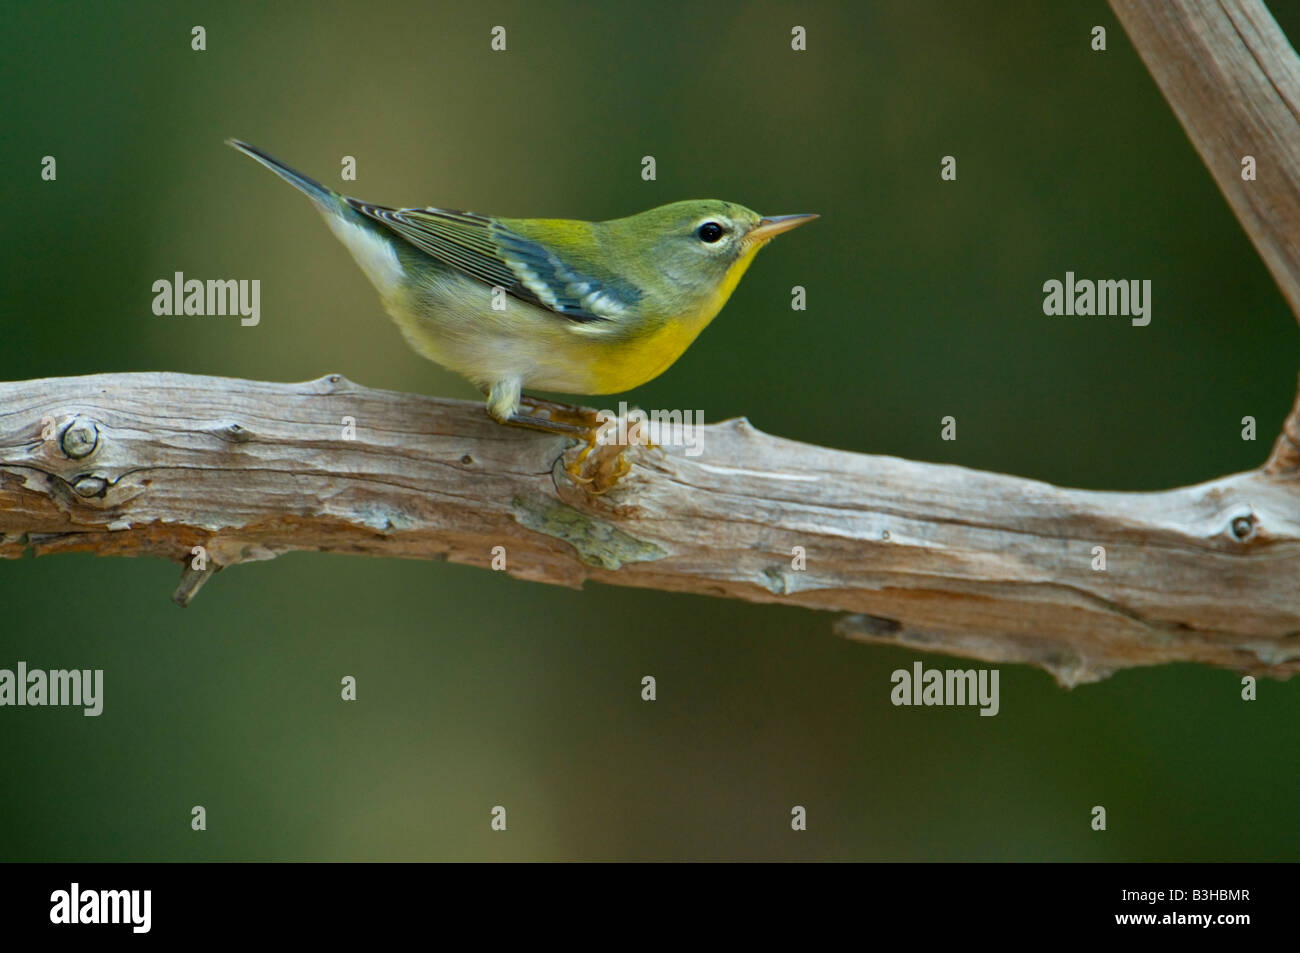 Image of a Northern Parula Warbler perched on a limb Stock Photo